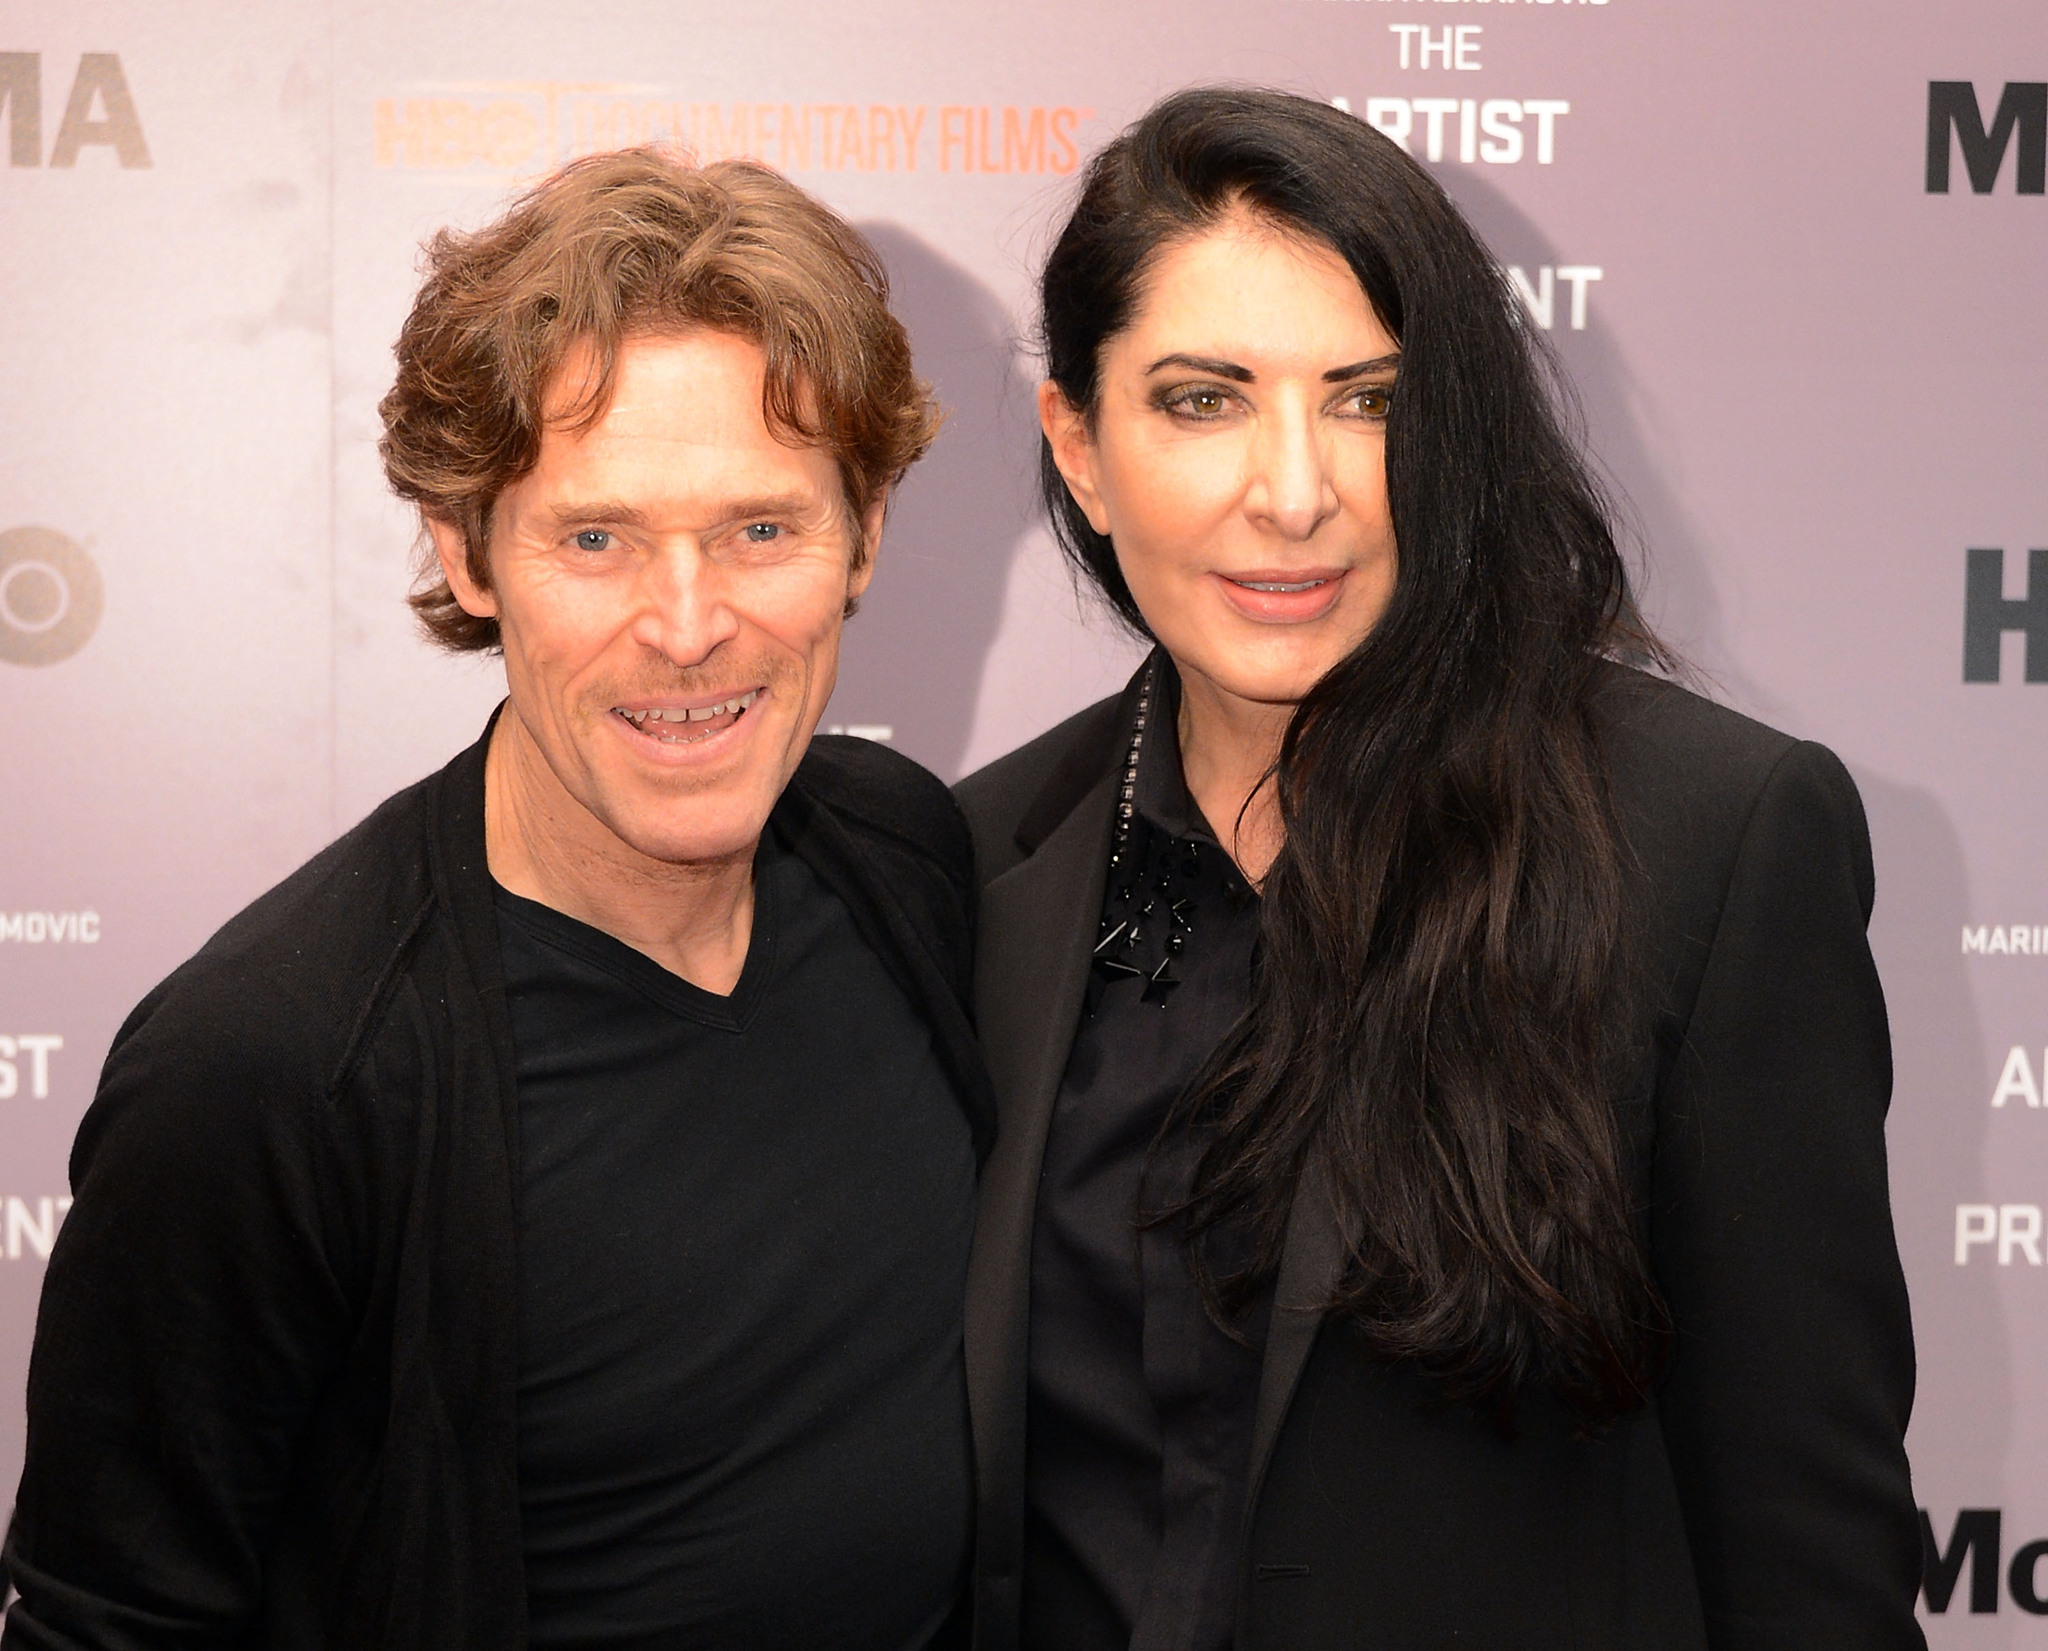 Willem Dafoe and Marina Abramovic at event of Marina Abramovic: The Artist Is Present (2012)